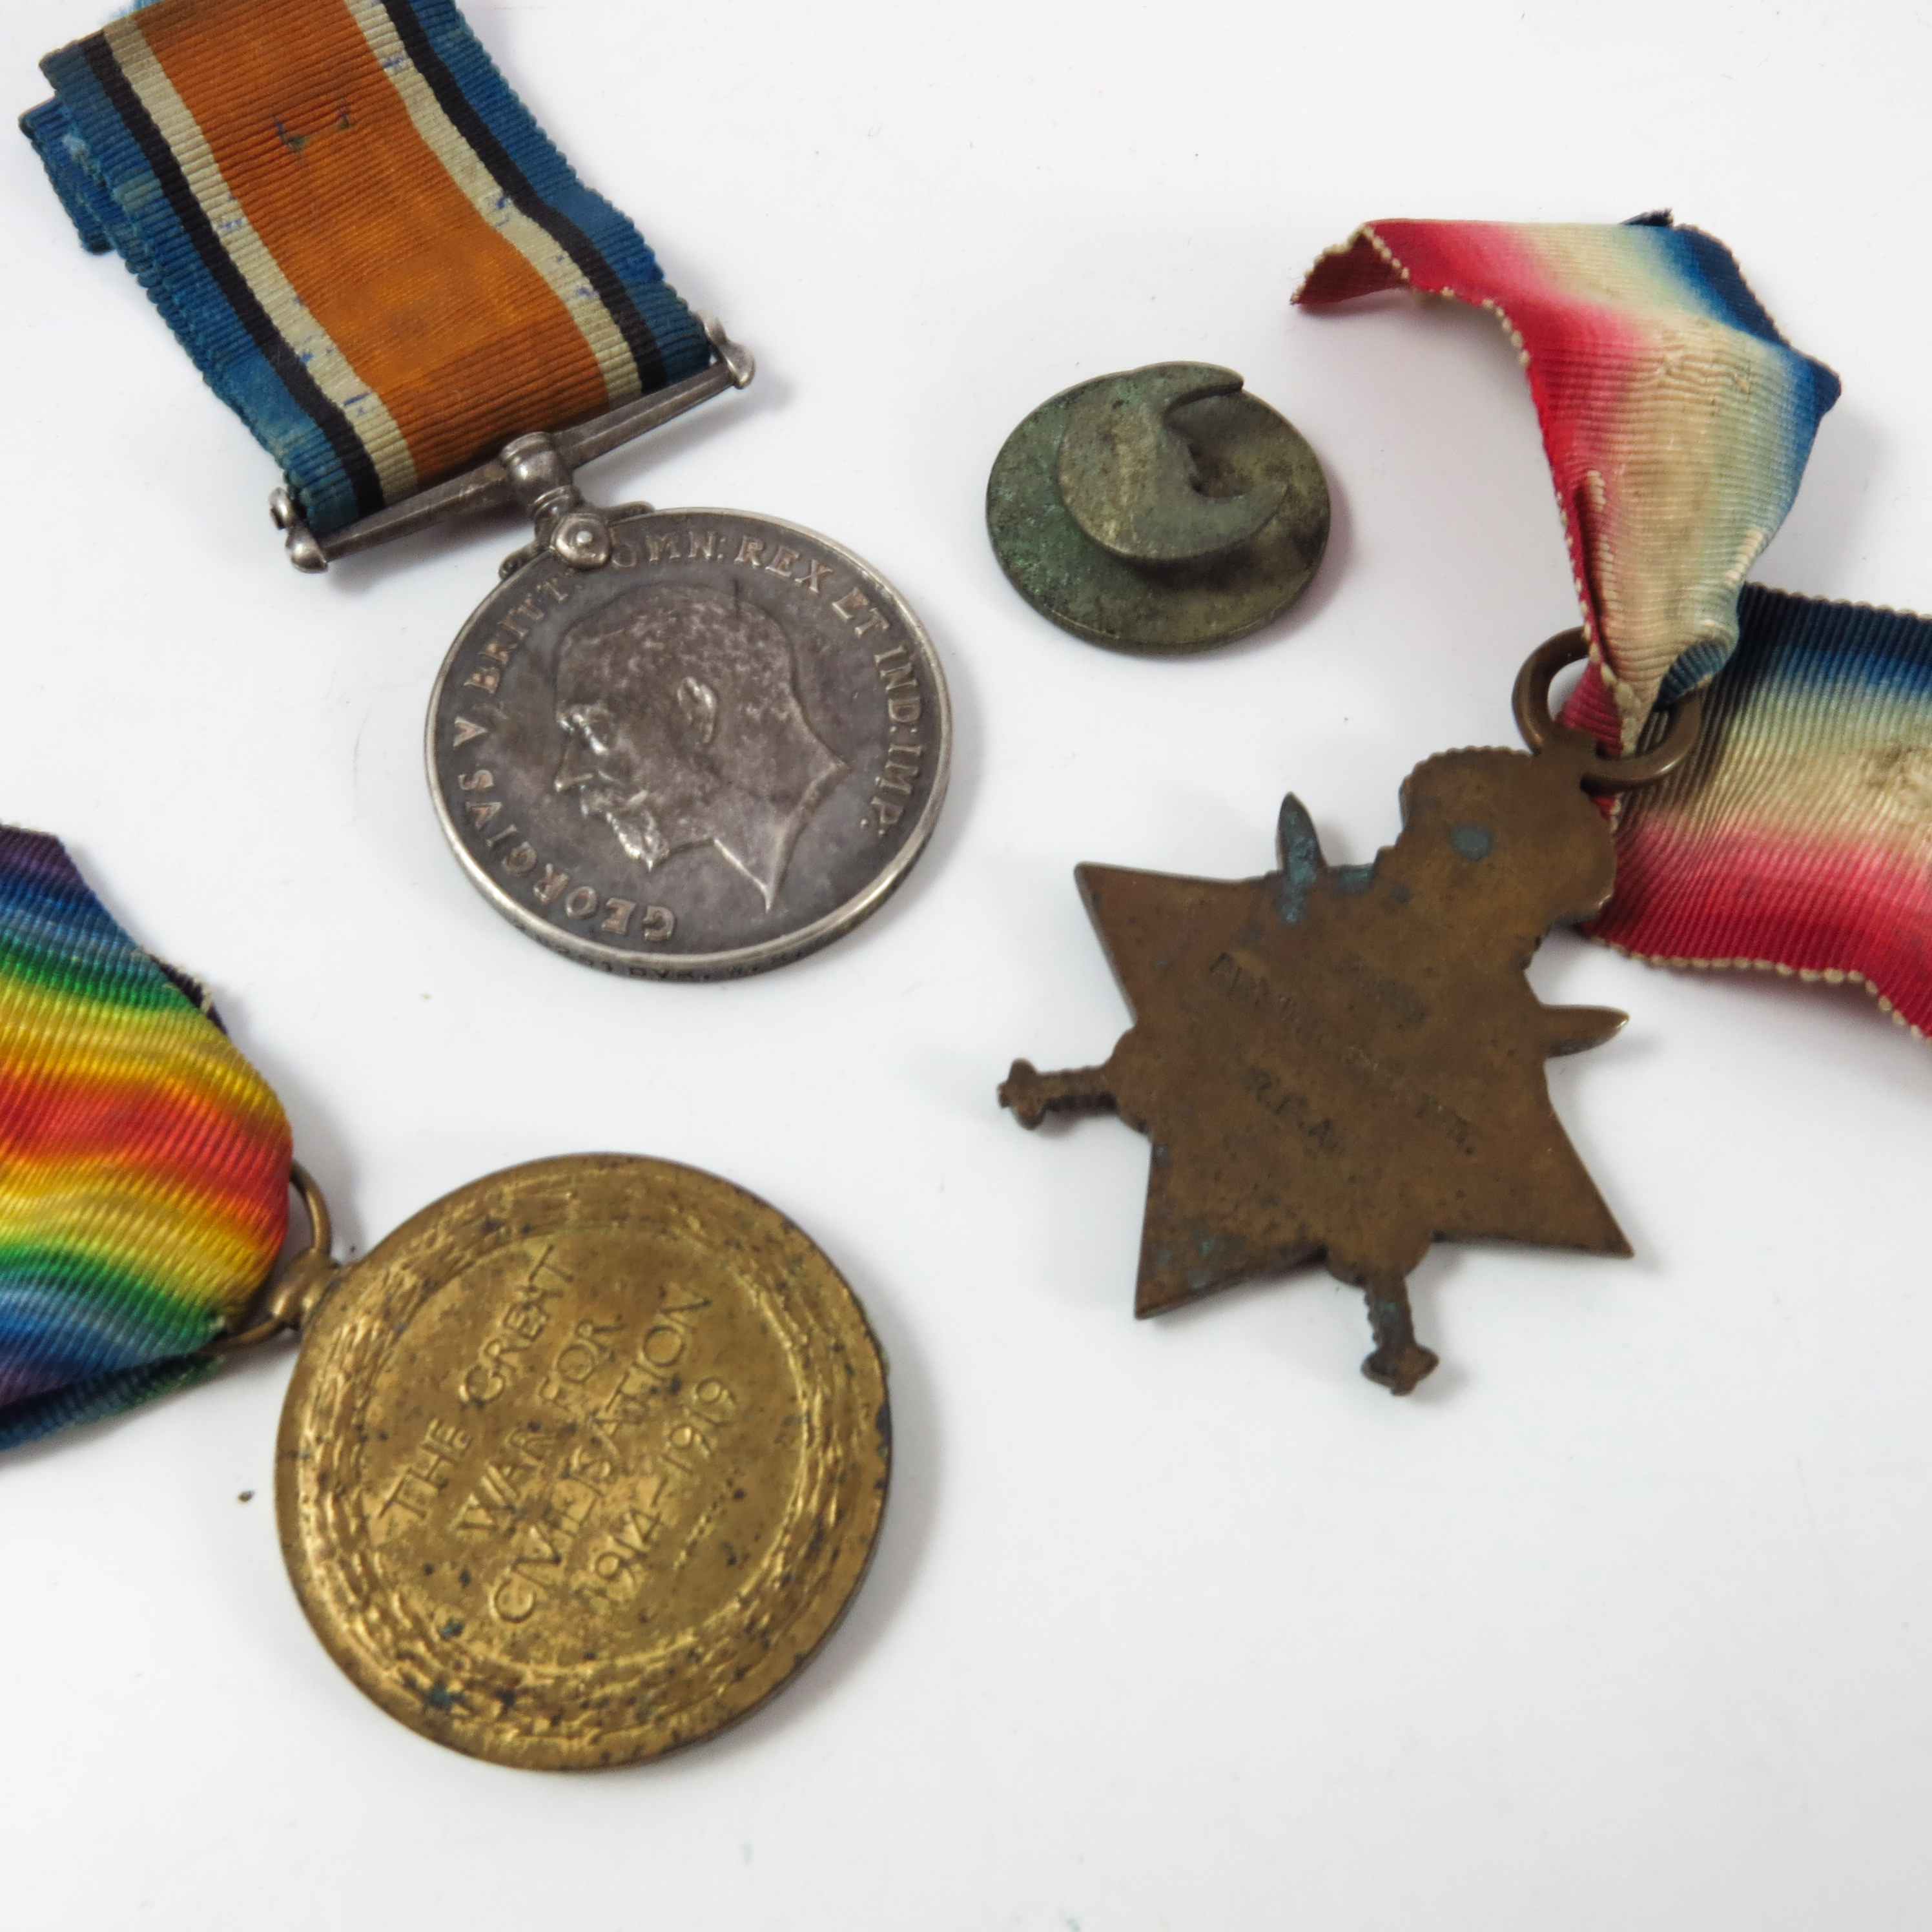 WWI 1914-18 WAR MEDAL AND VICTORY MEDAL, 1914-15 STAR, LOYAL SERVICE BADGE 28251 DRV. W. R. - Image 2 of 4